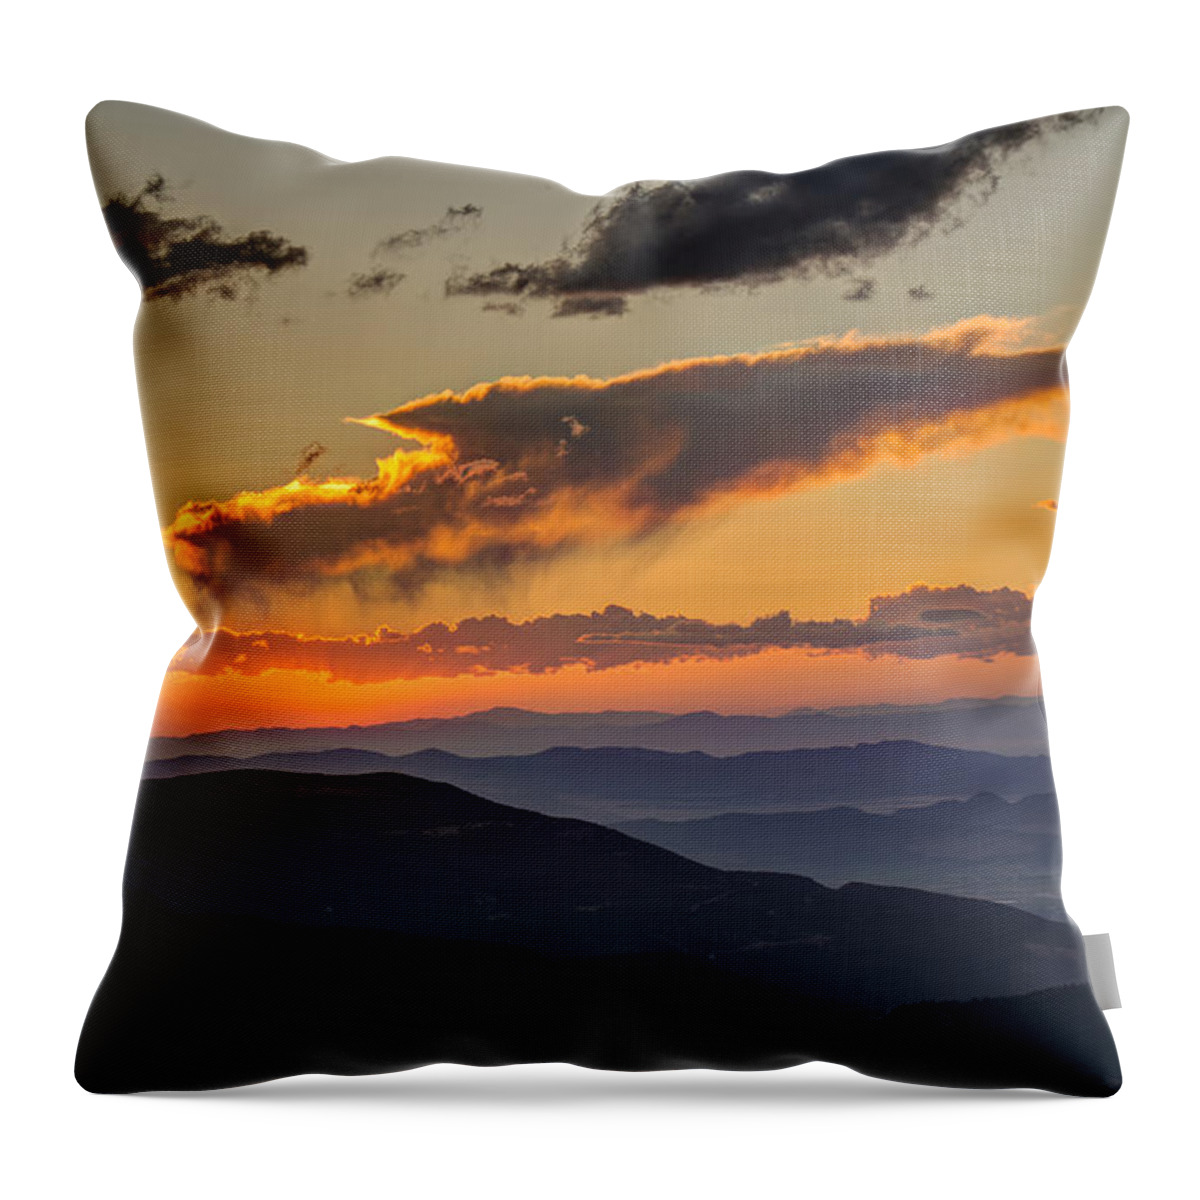 2015 Throw Pillow featuring the photograph Sunset Layers by David R Robinson